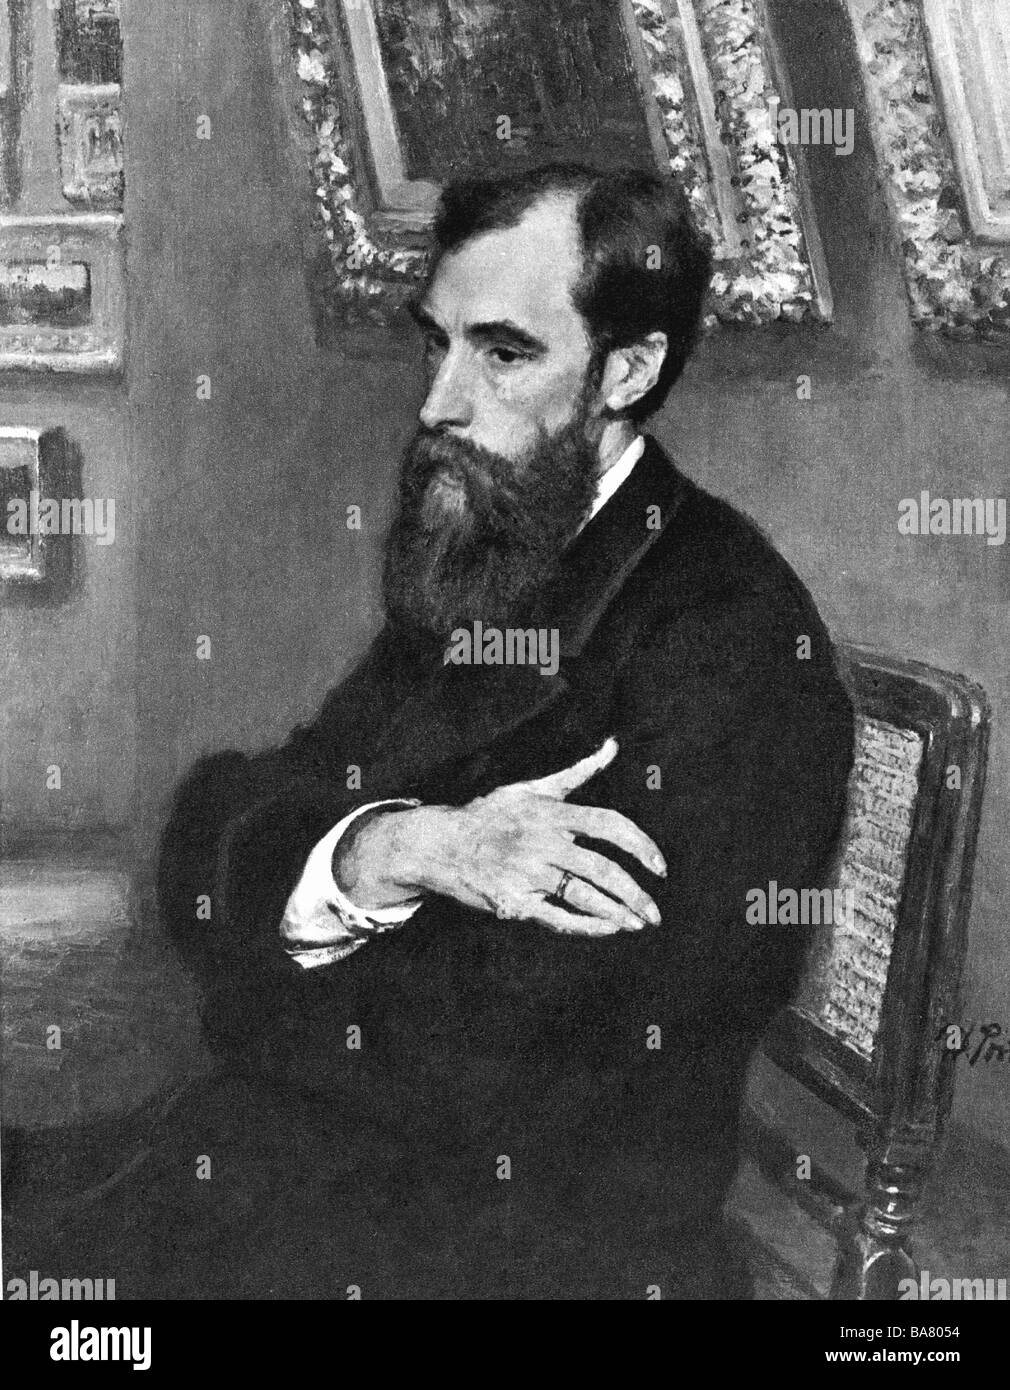 Tretyakov, Pavel Mikhailovich, 27.12.1832 - 16.12.1898, Russian art collector, half length, print after painting by Ilya Repin, 1883, Artist's Copyright has not to be cleared Stock Photo